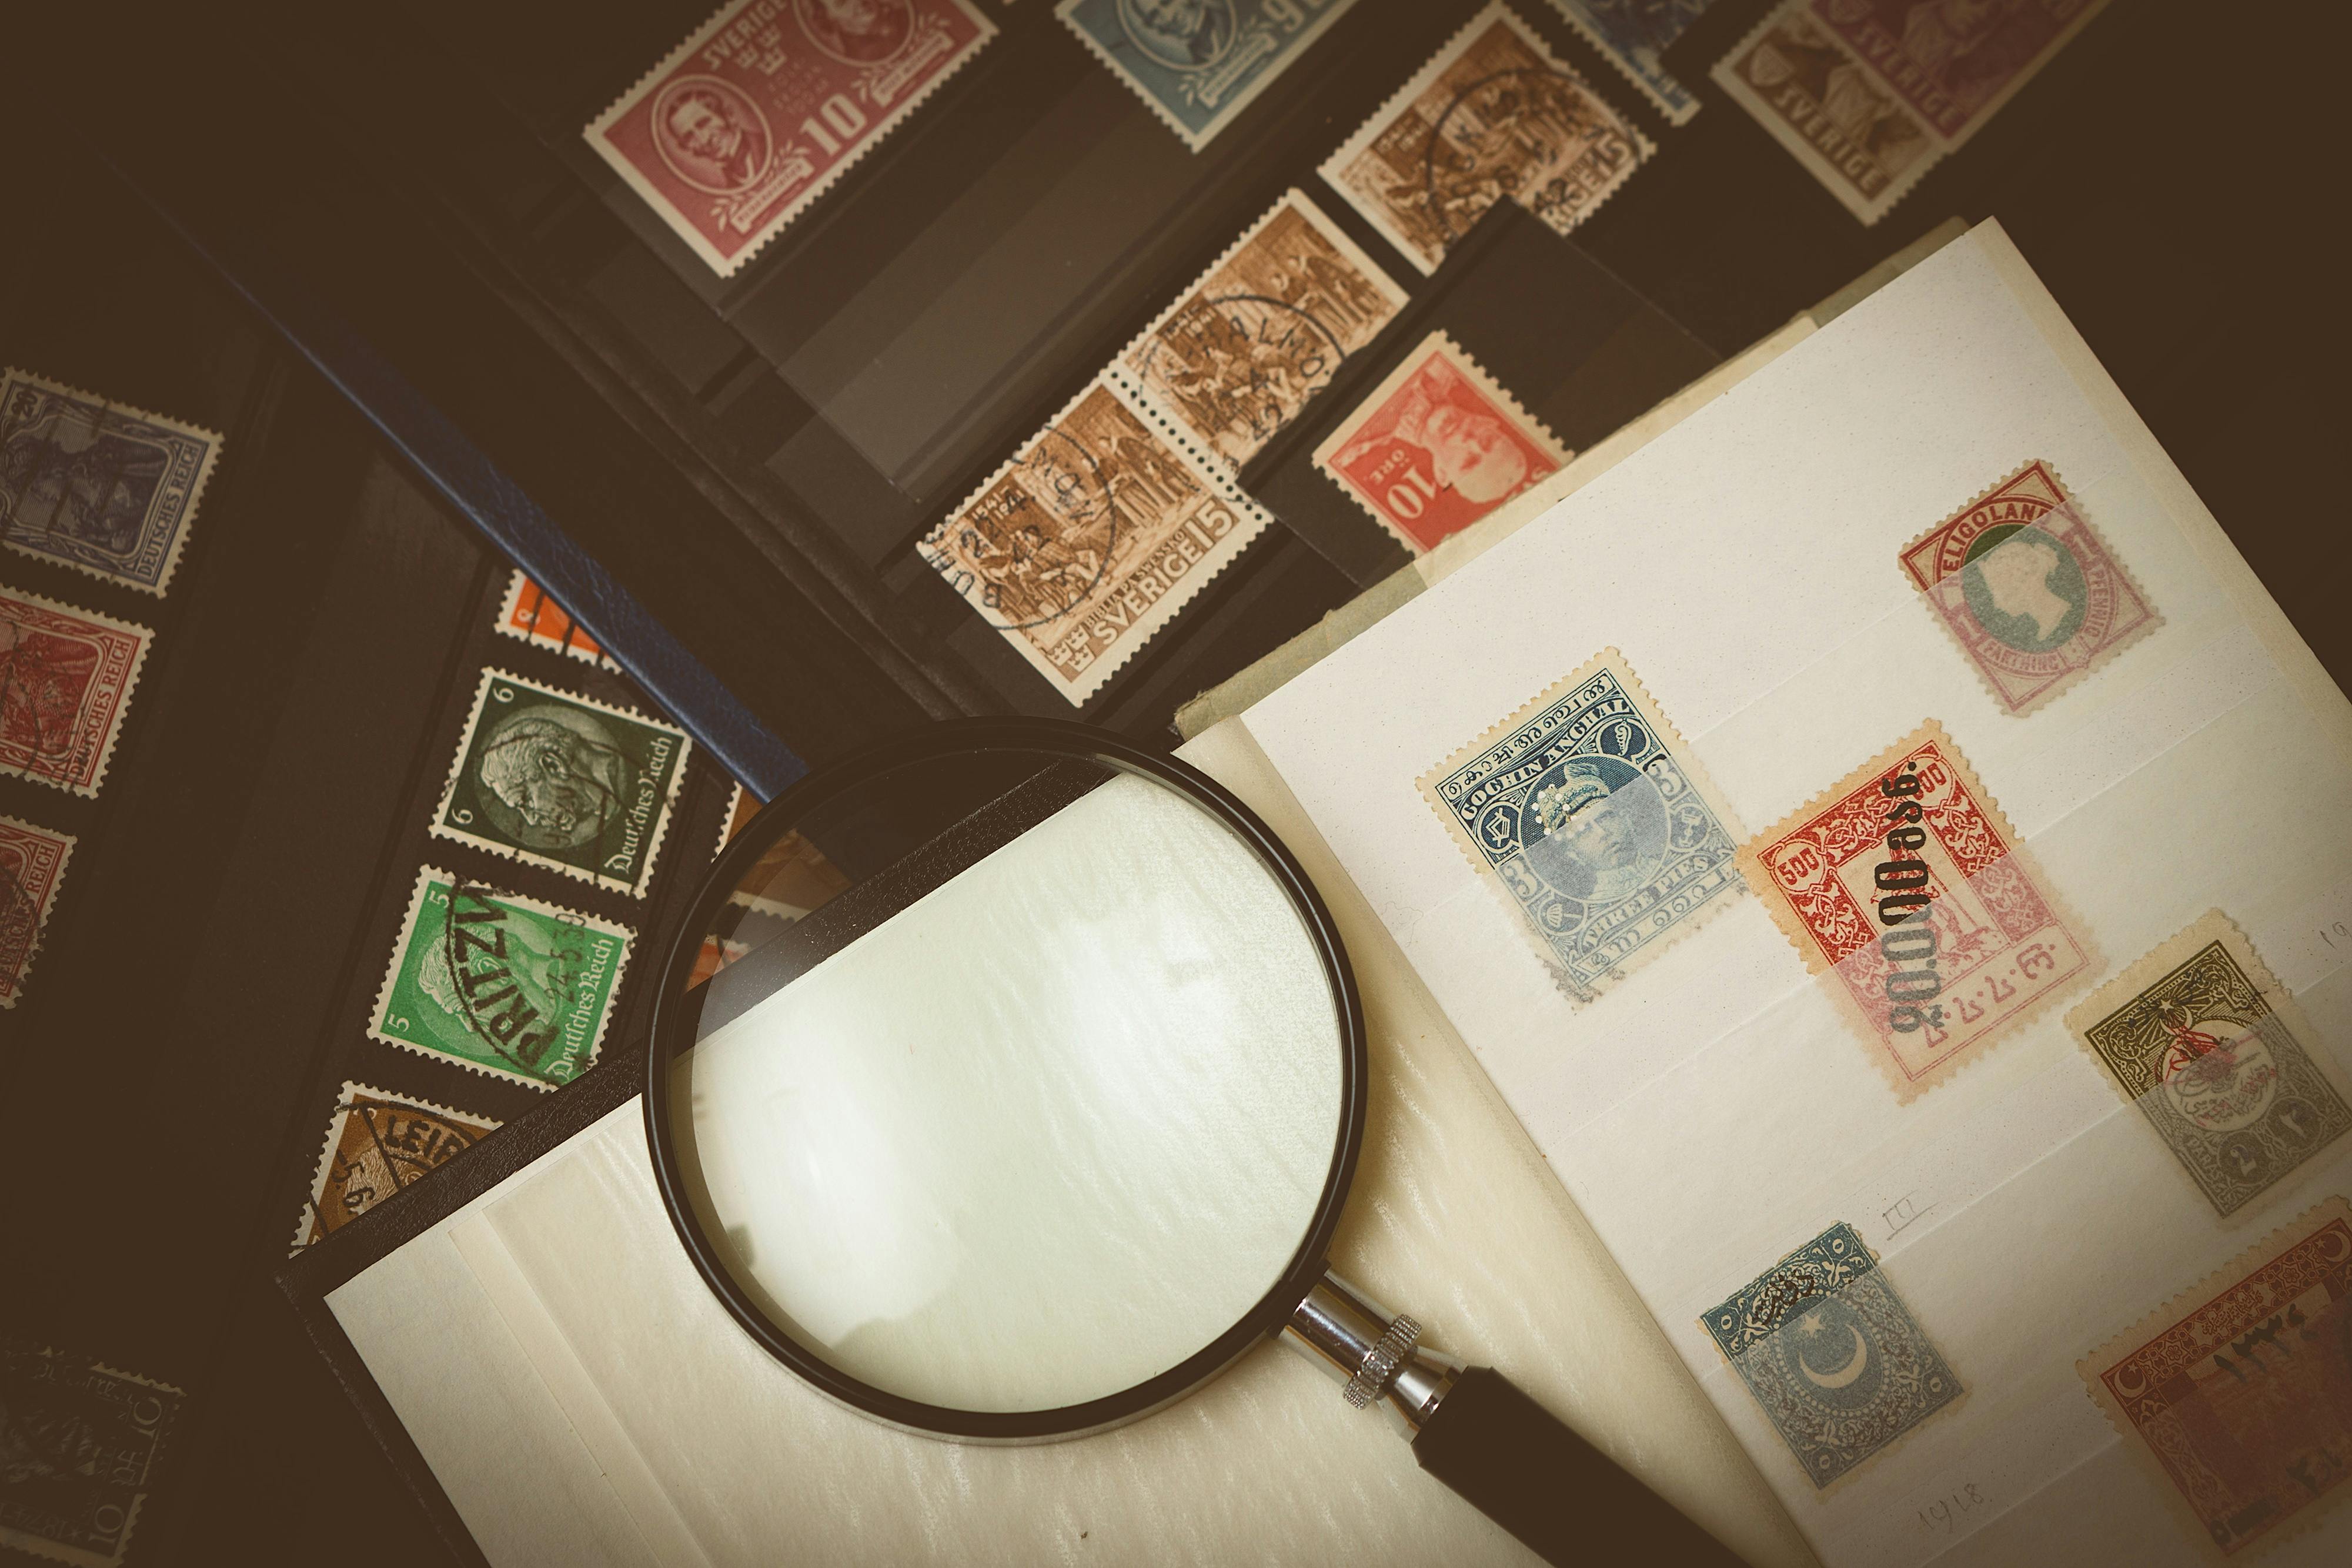 Stamp collection under the magnifier